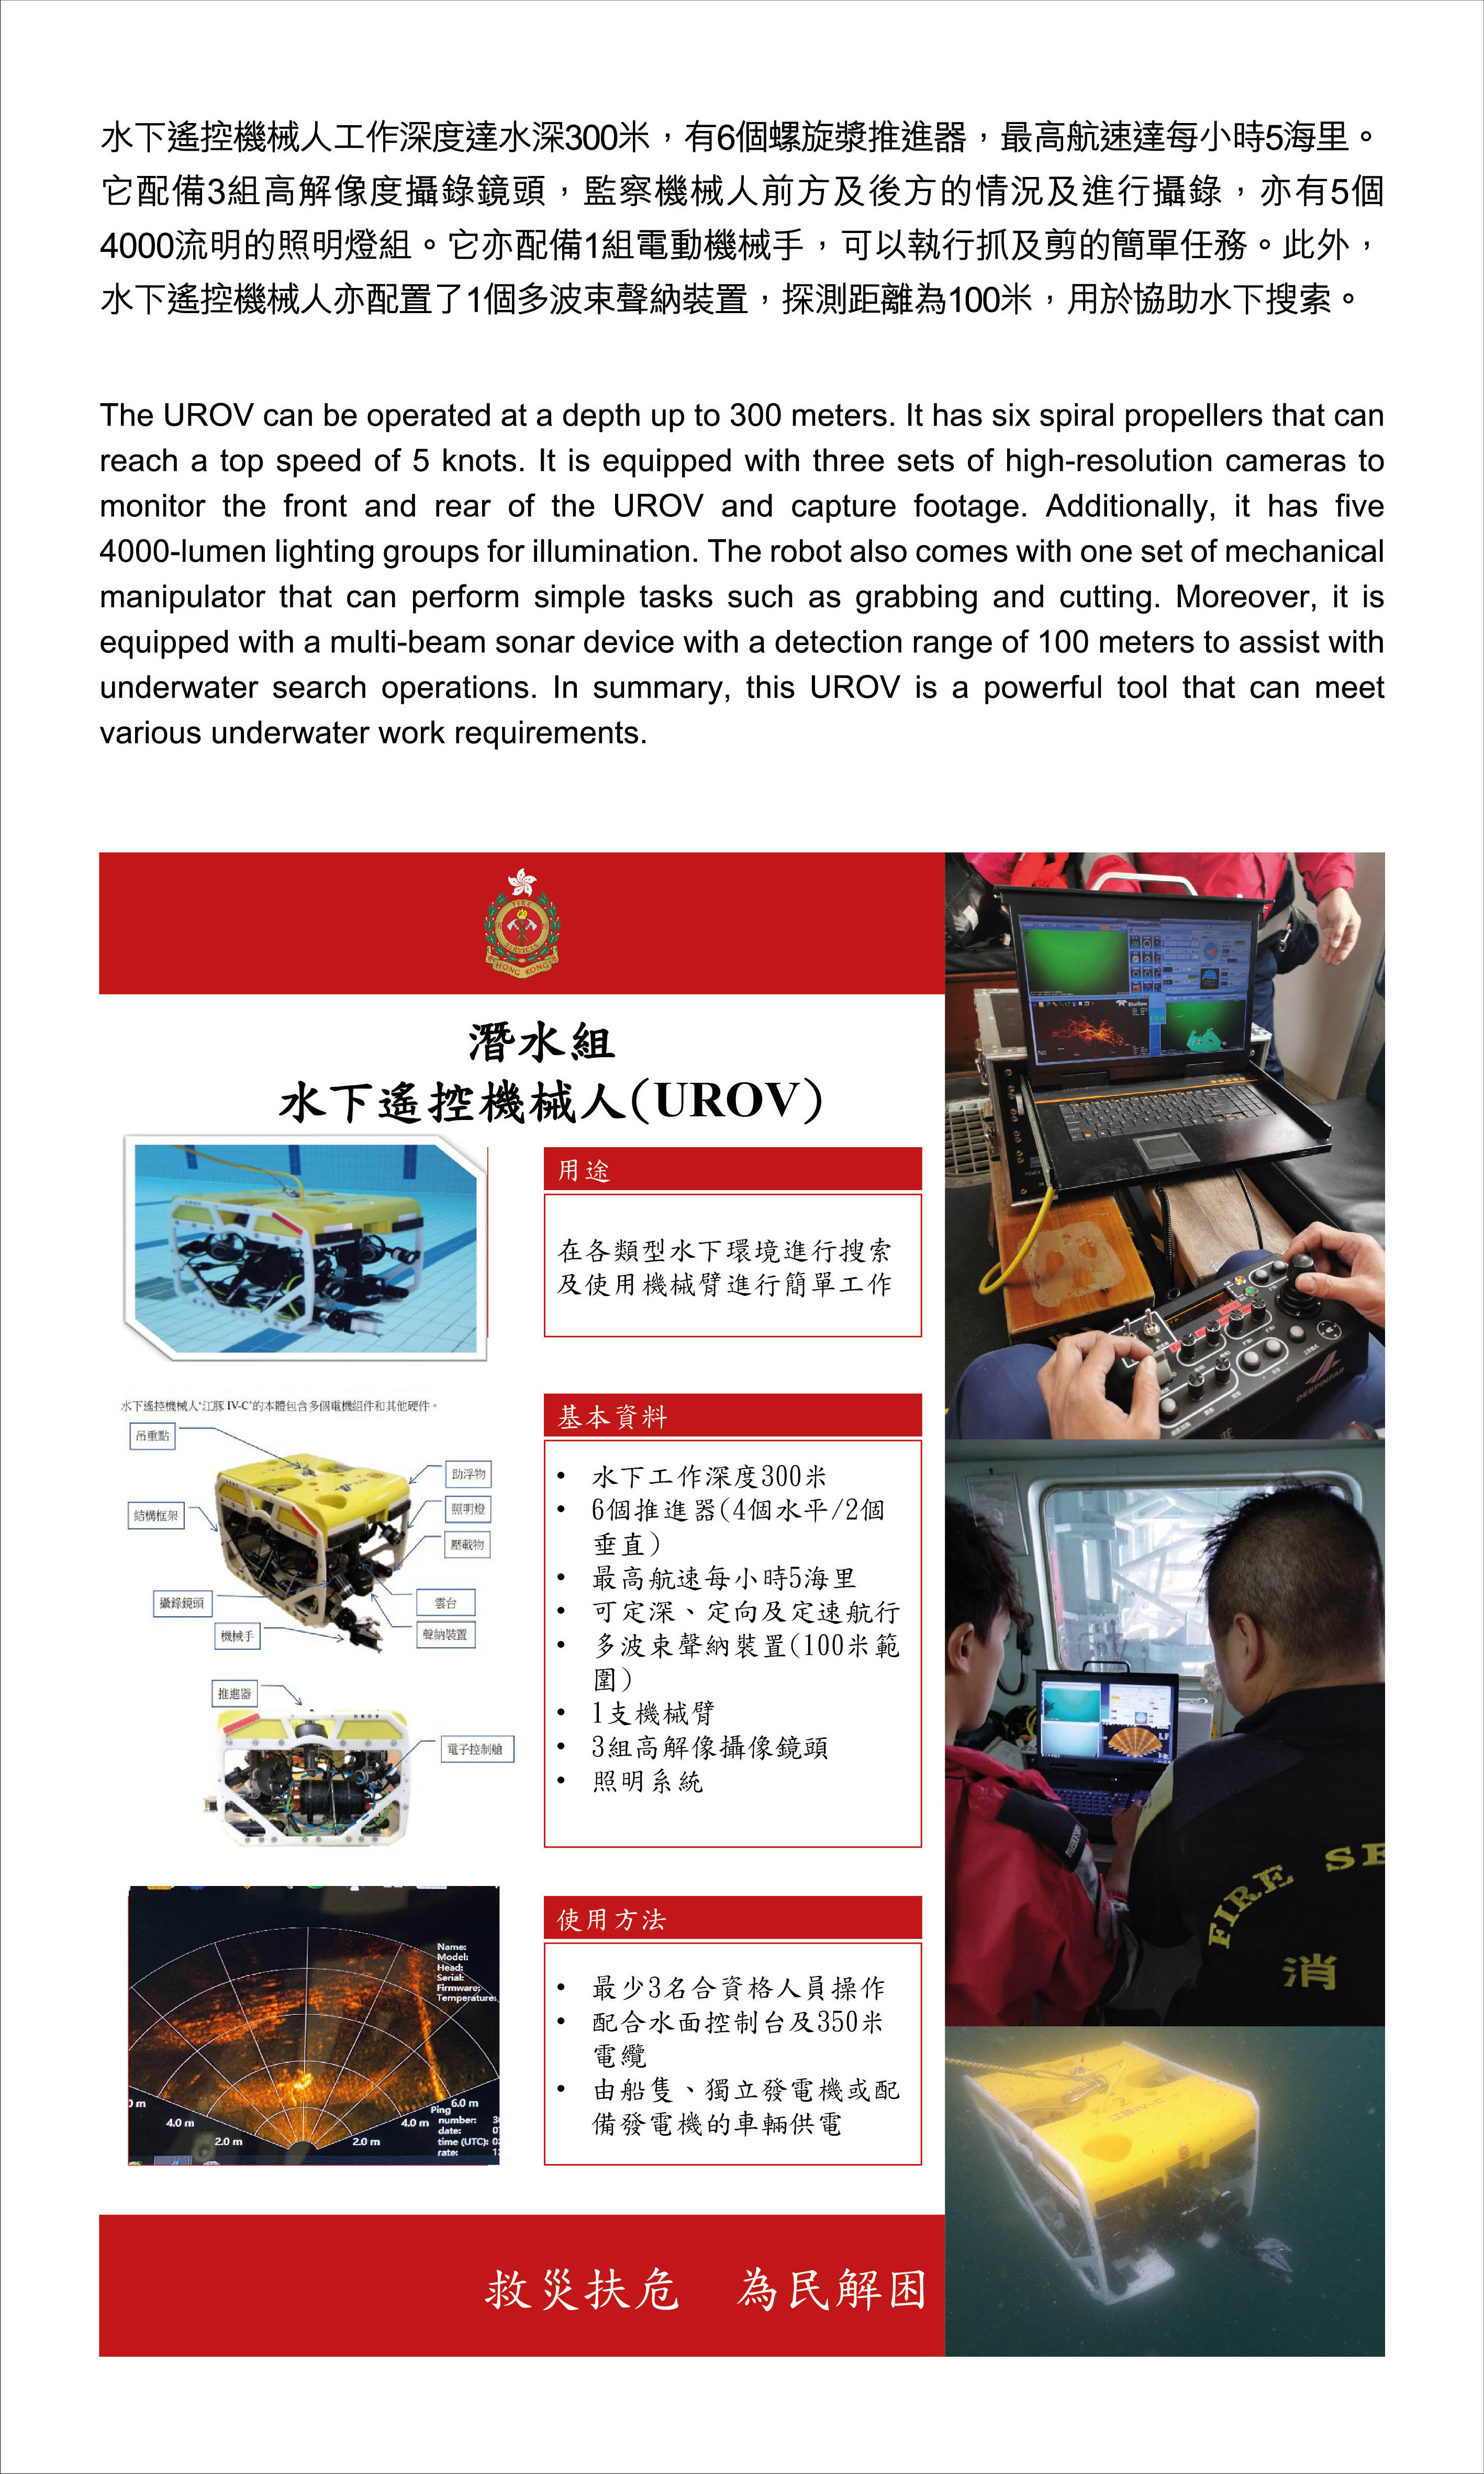 Underwater Remotely Operated Vehicle (UROV)